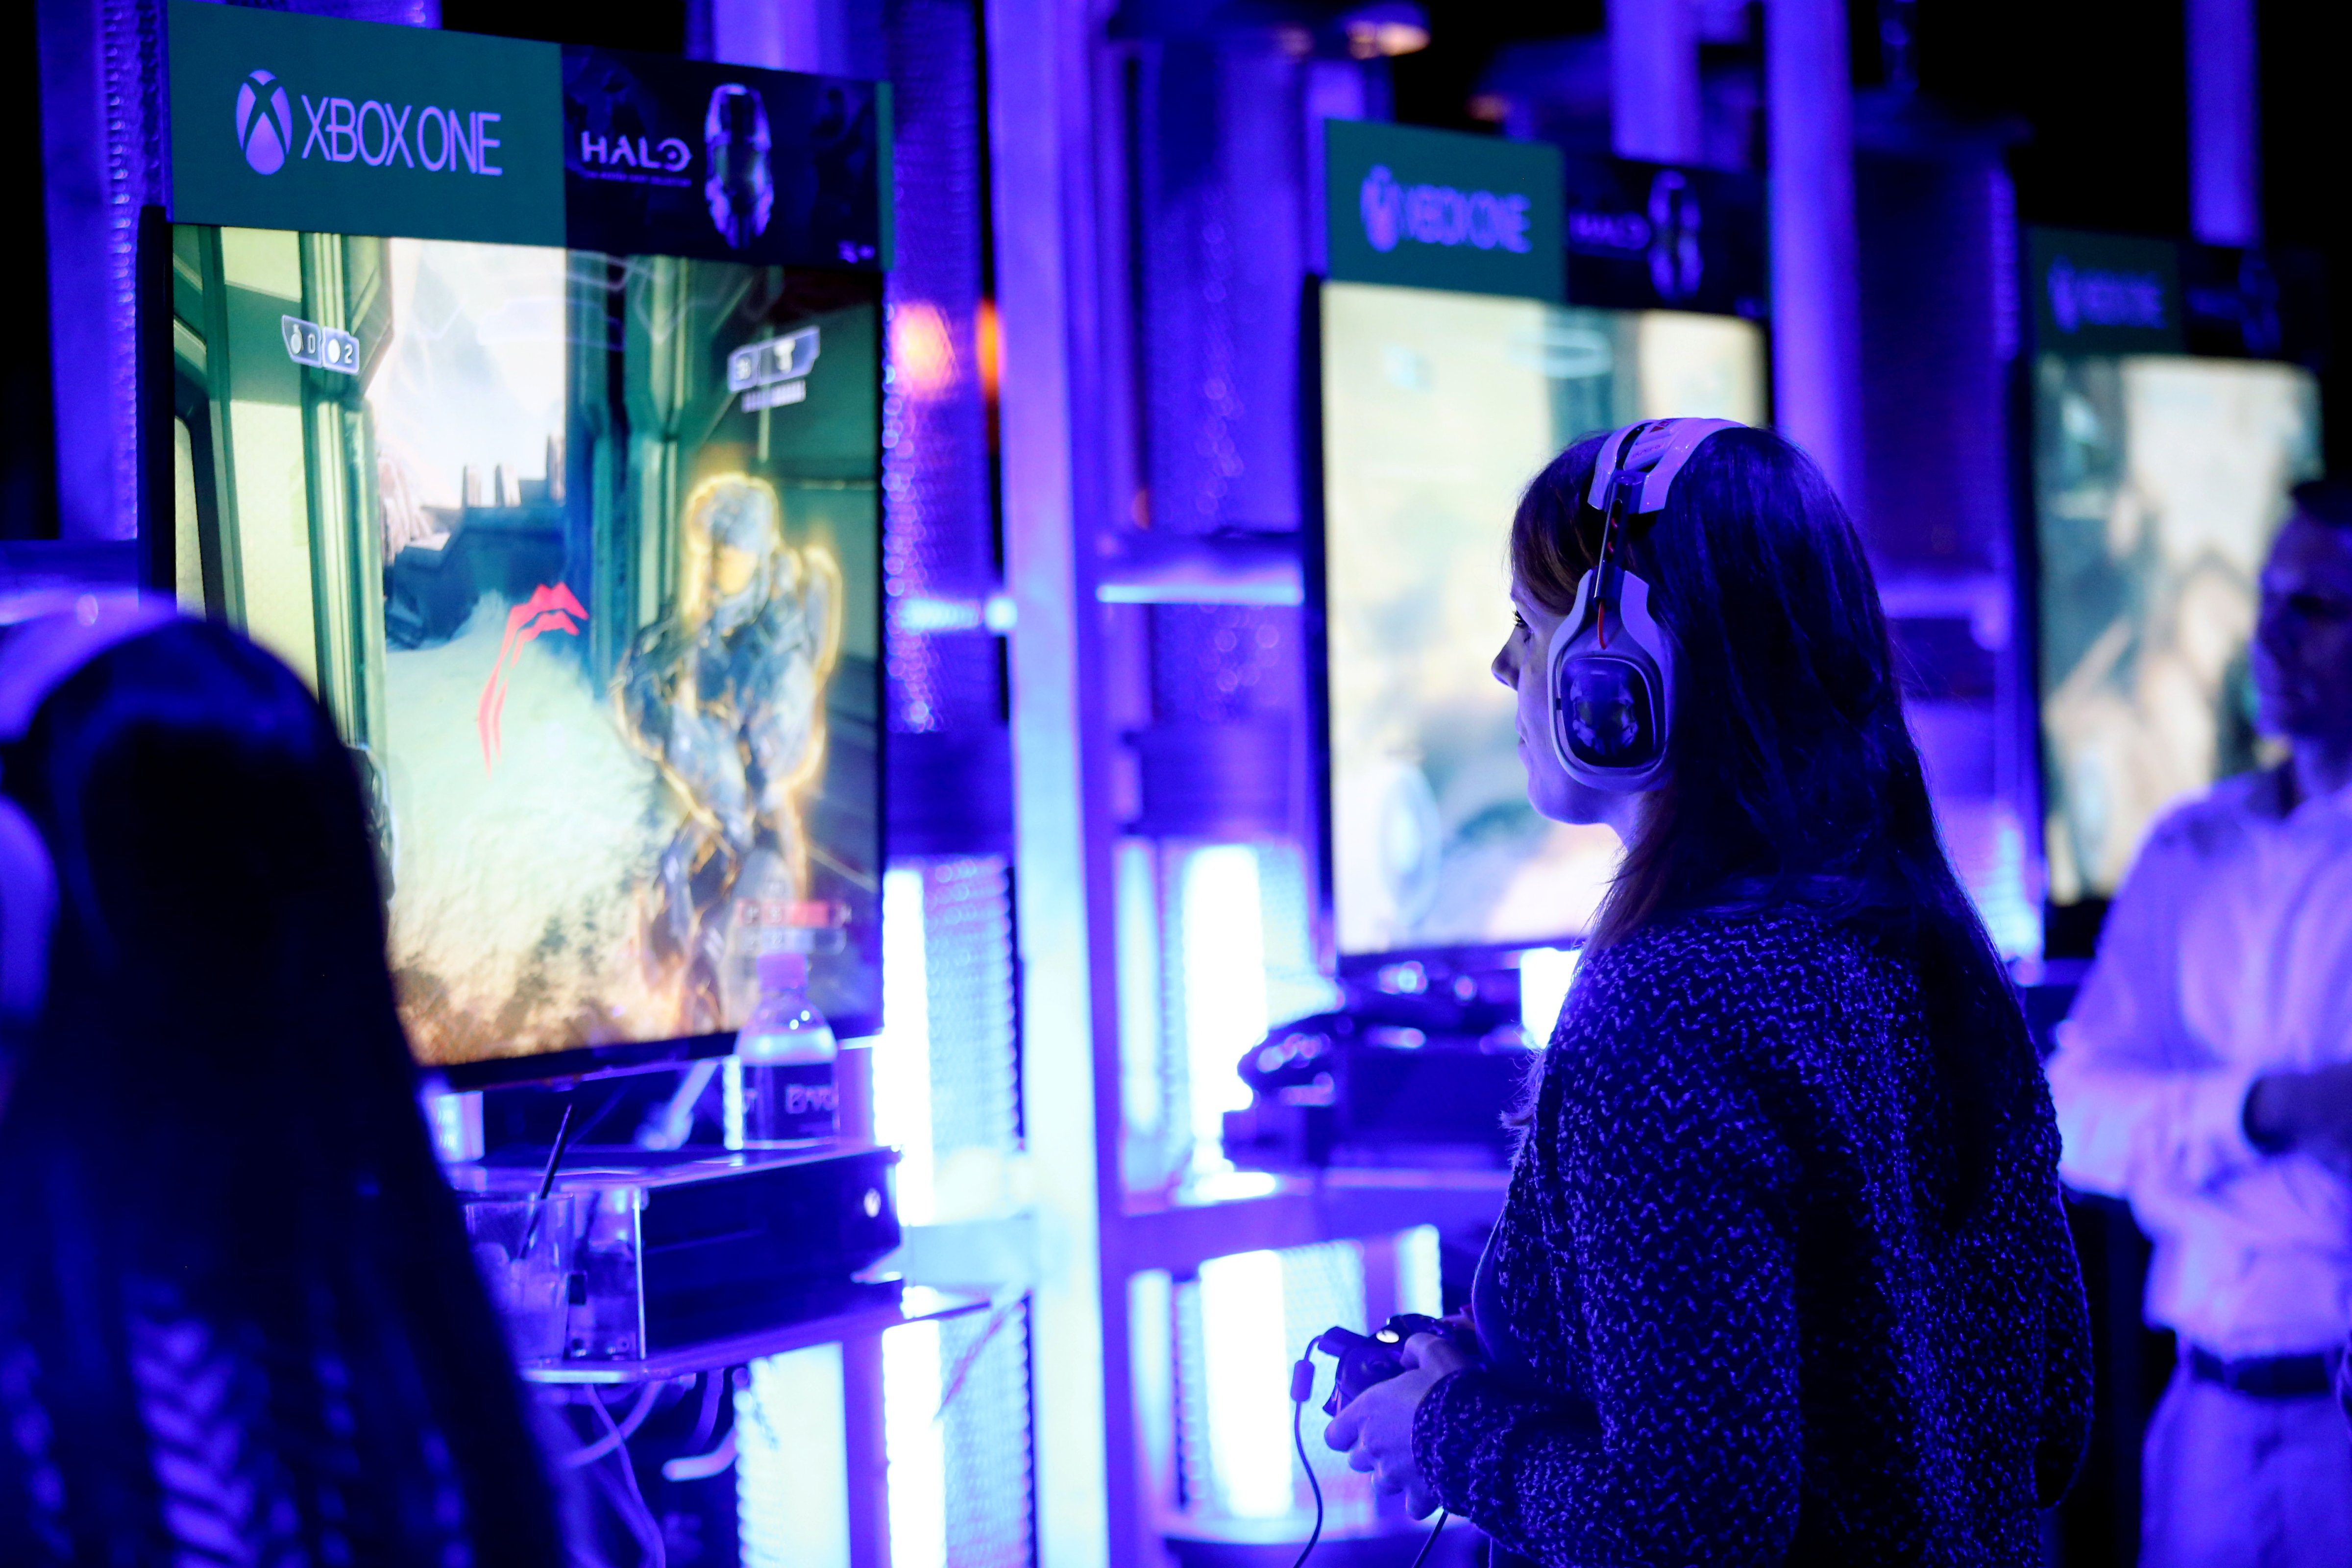 Xbox fans play games from the popular Halo franchise at HaloFest at the Avalon Theatre in Los Angeles on Monday, Nov. 10, 2014 (Matt Sayles—Invision/AP)